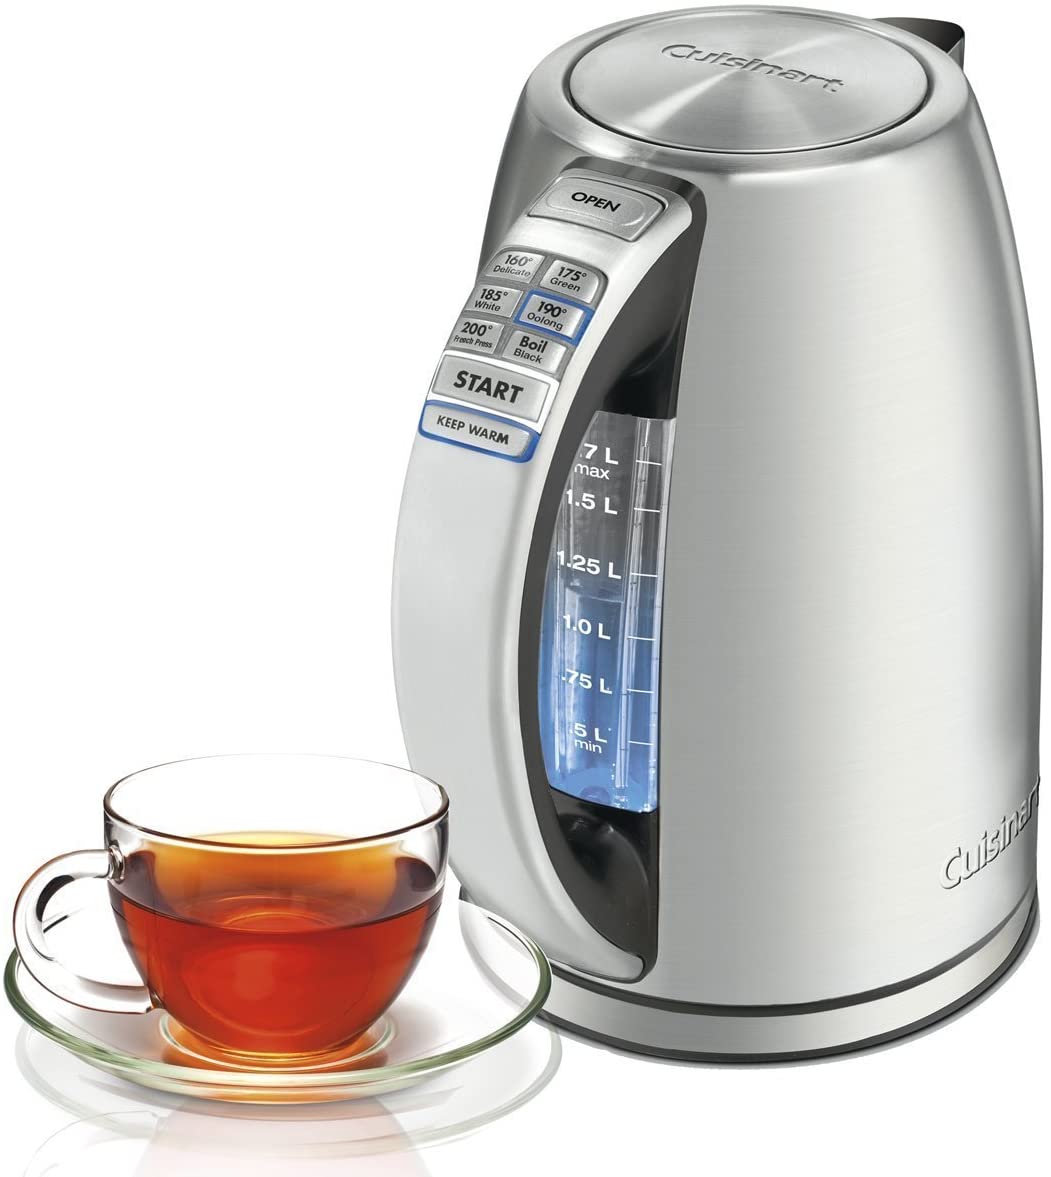 Cuisinart CPK-17FR 1.7 Liter Cordless Electric Kettle, Silver - Certified Refurbished